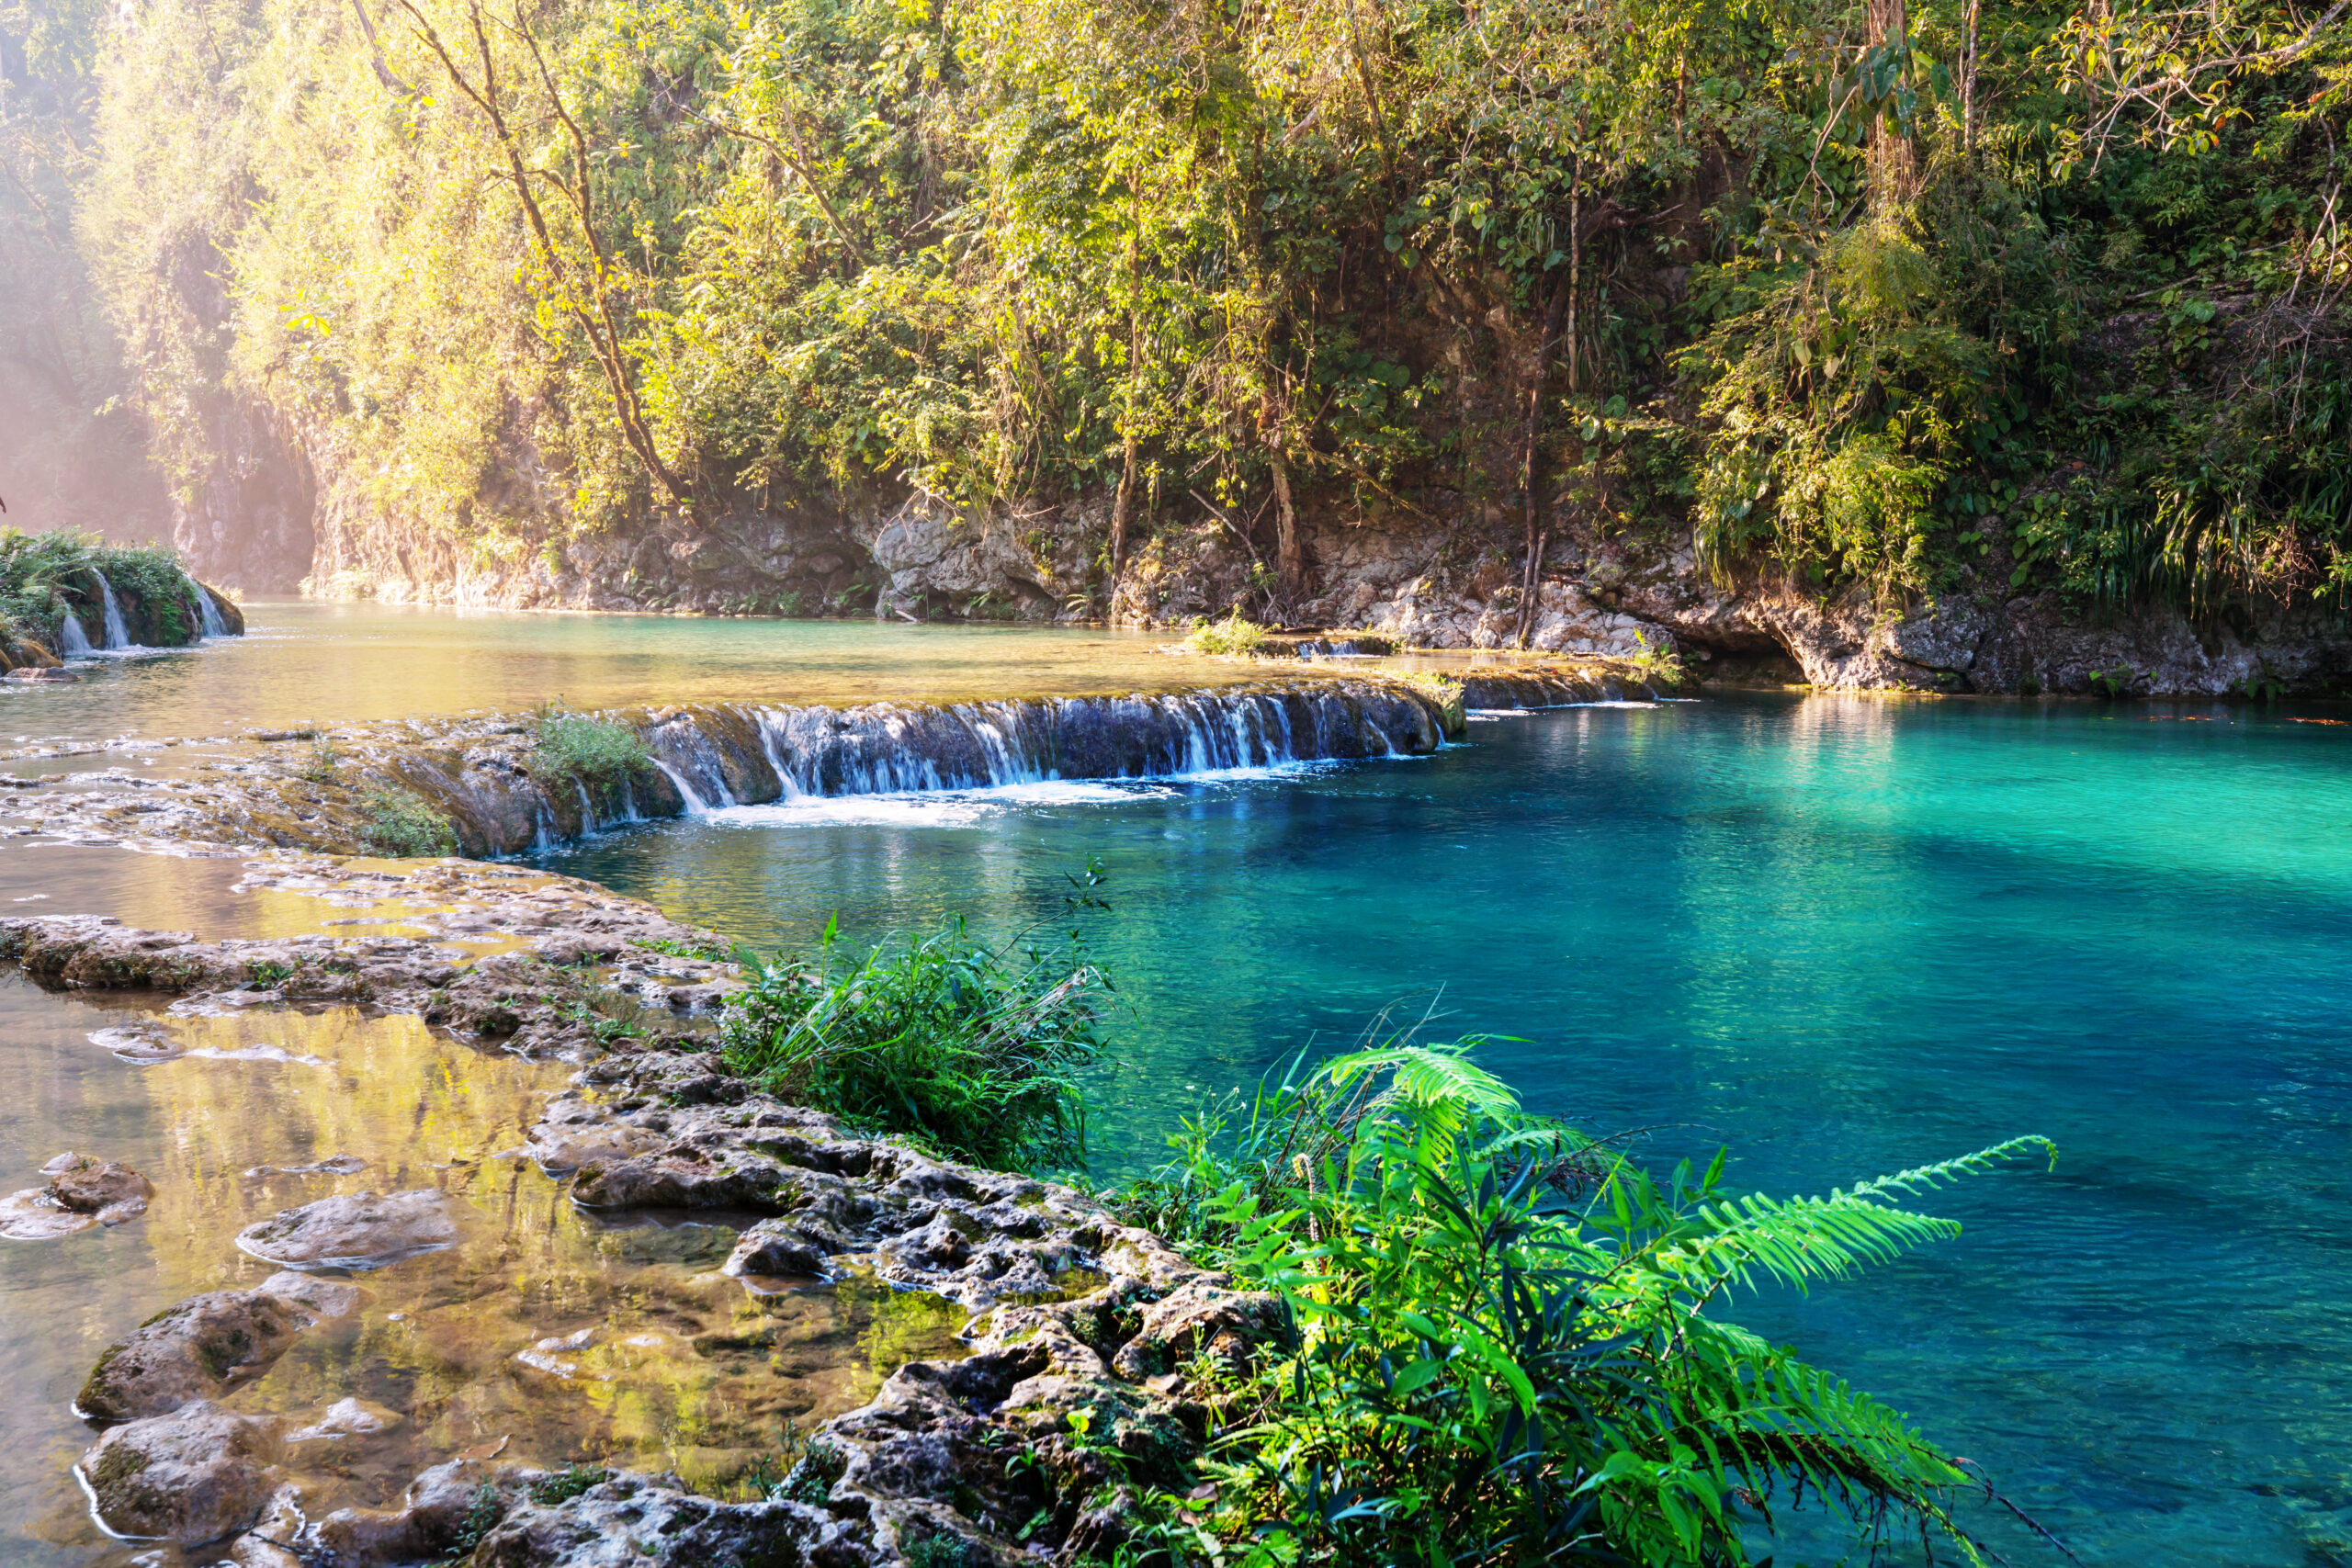 A serene natural pool surrounded by lush green trees